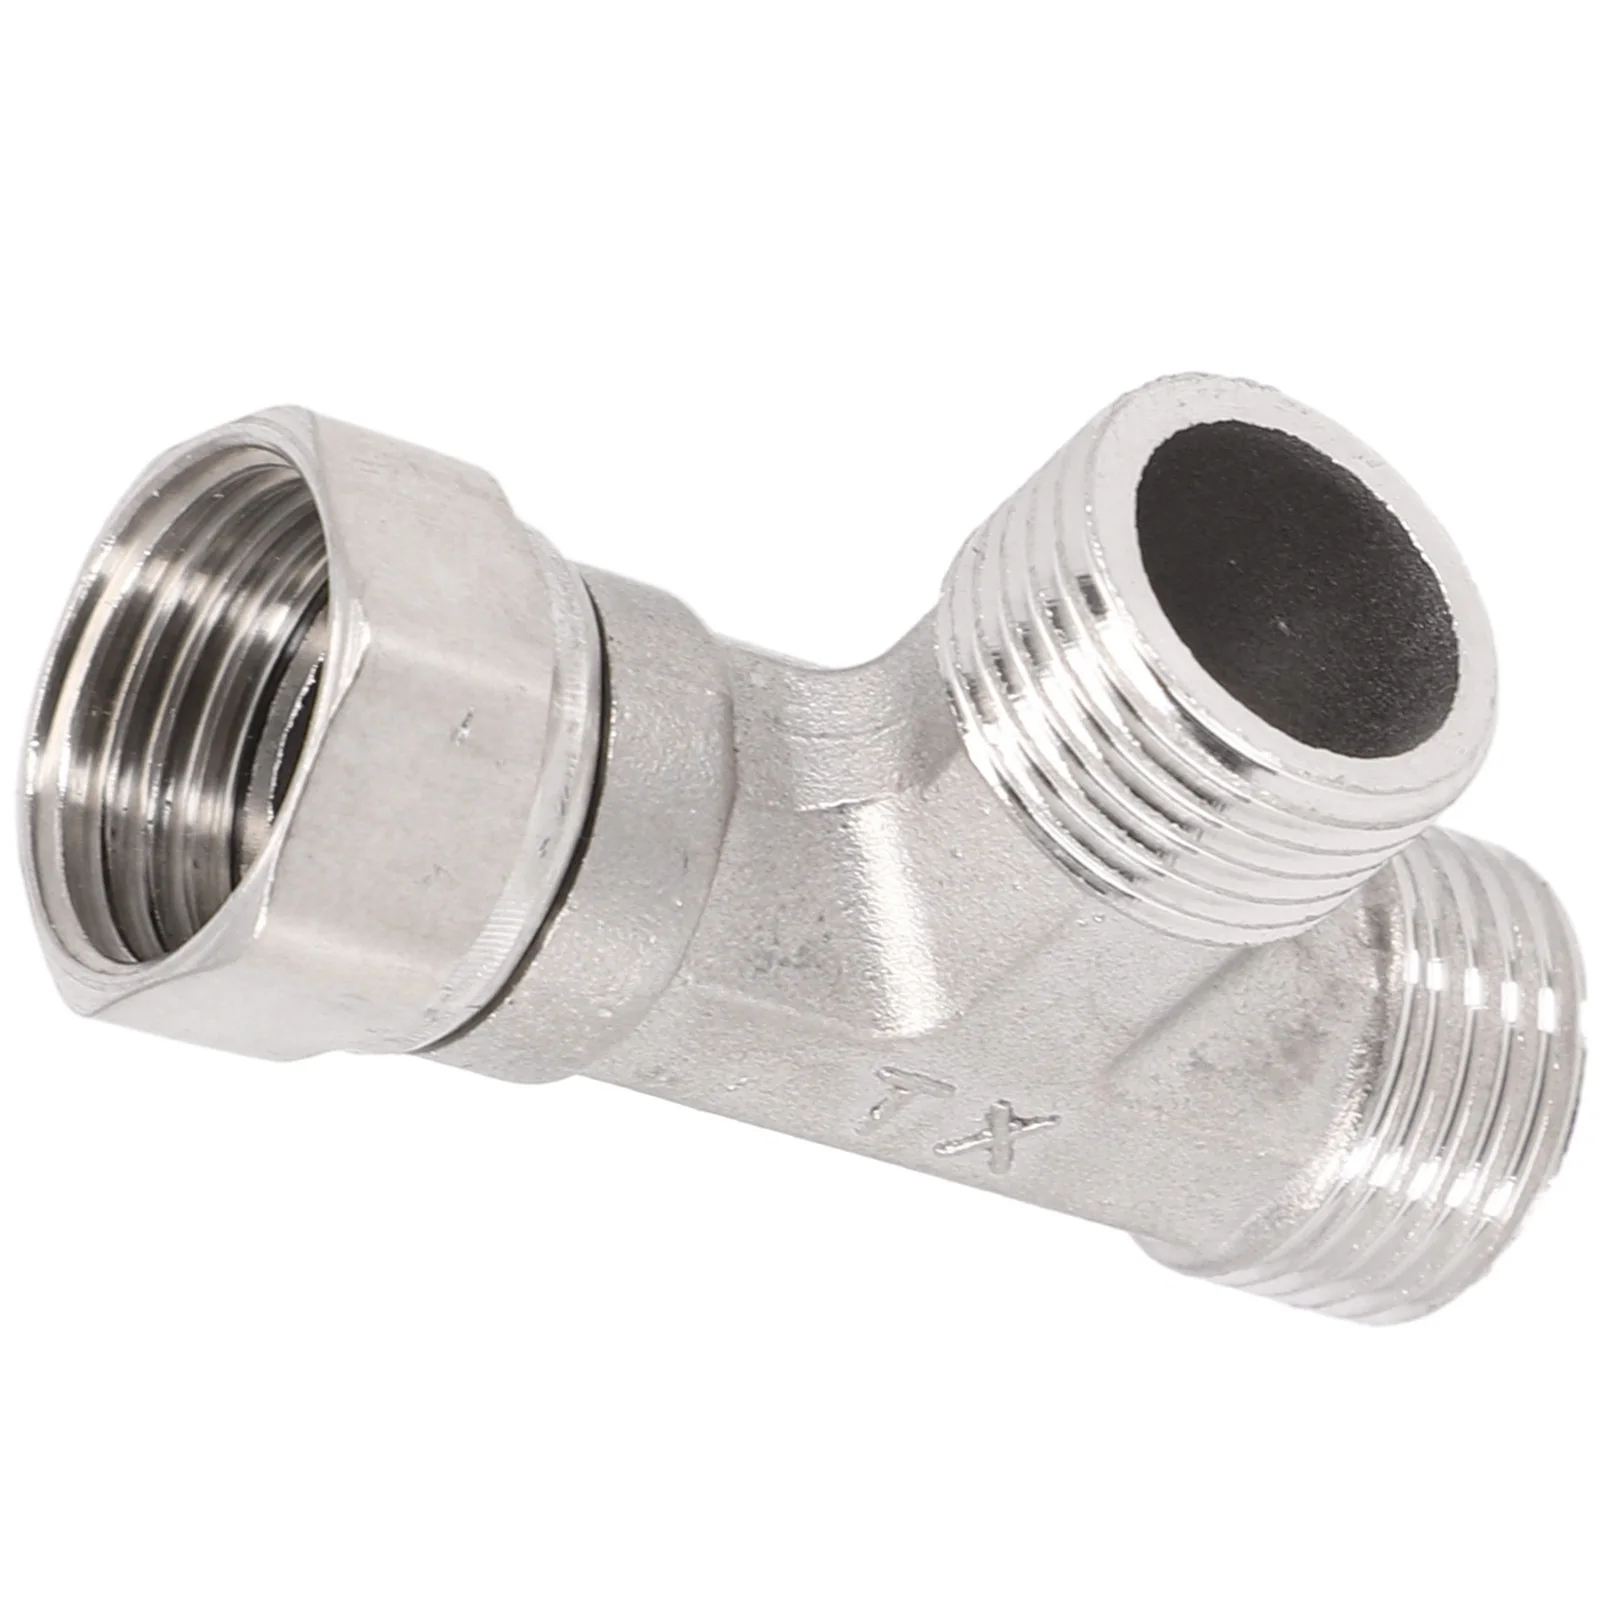 

Reliable Performance T Adapter 3 Ways Valve Made of Stainless Material Easy to Install Suitable for Bathroom Toilet